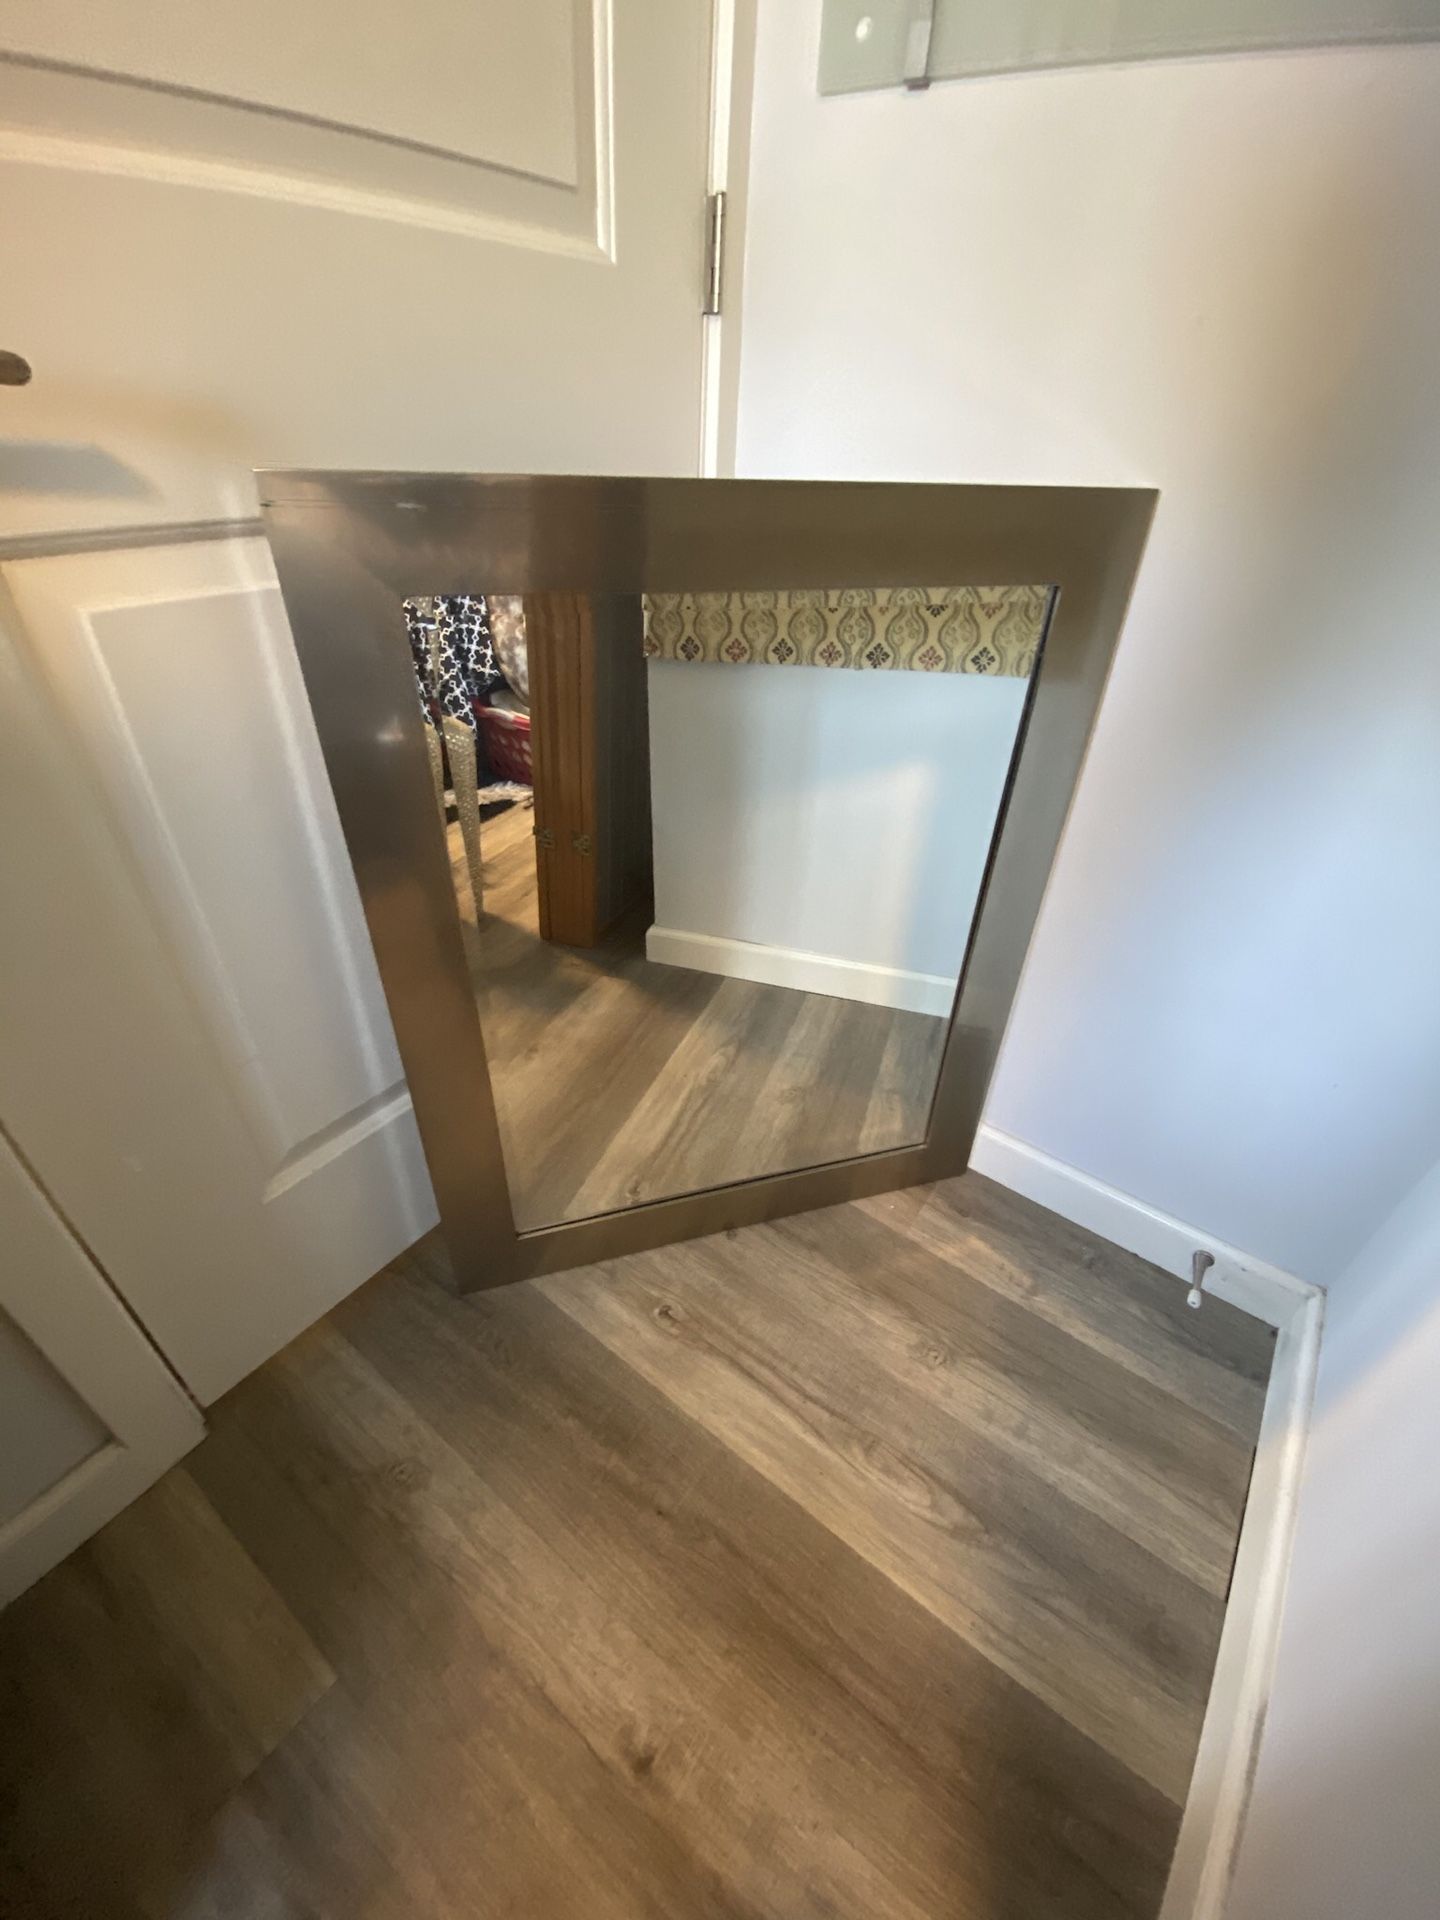 MOVING SALE - Stainless steel mirror